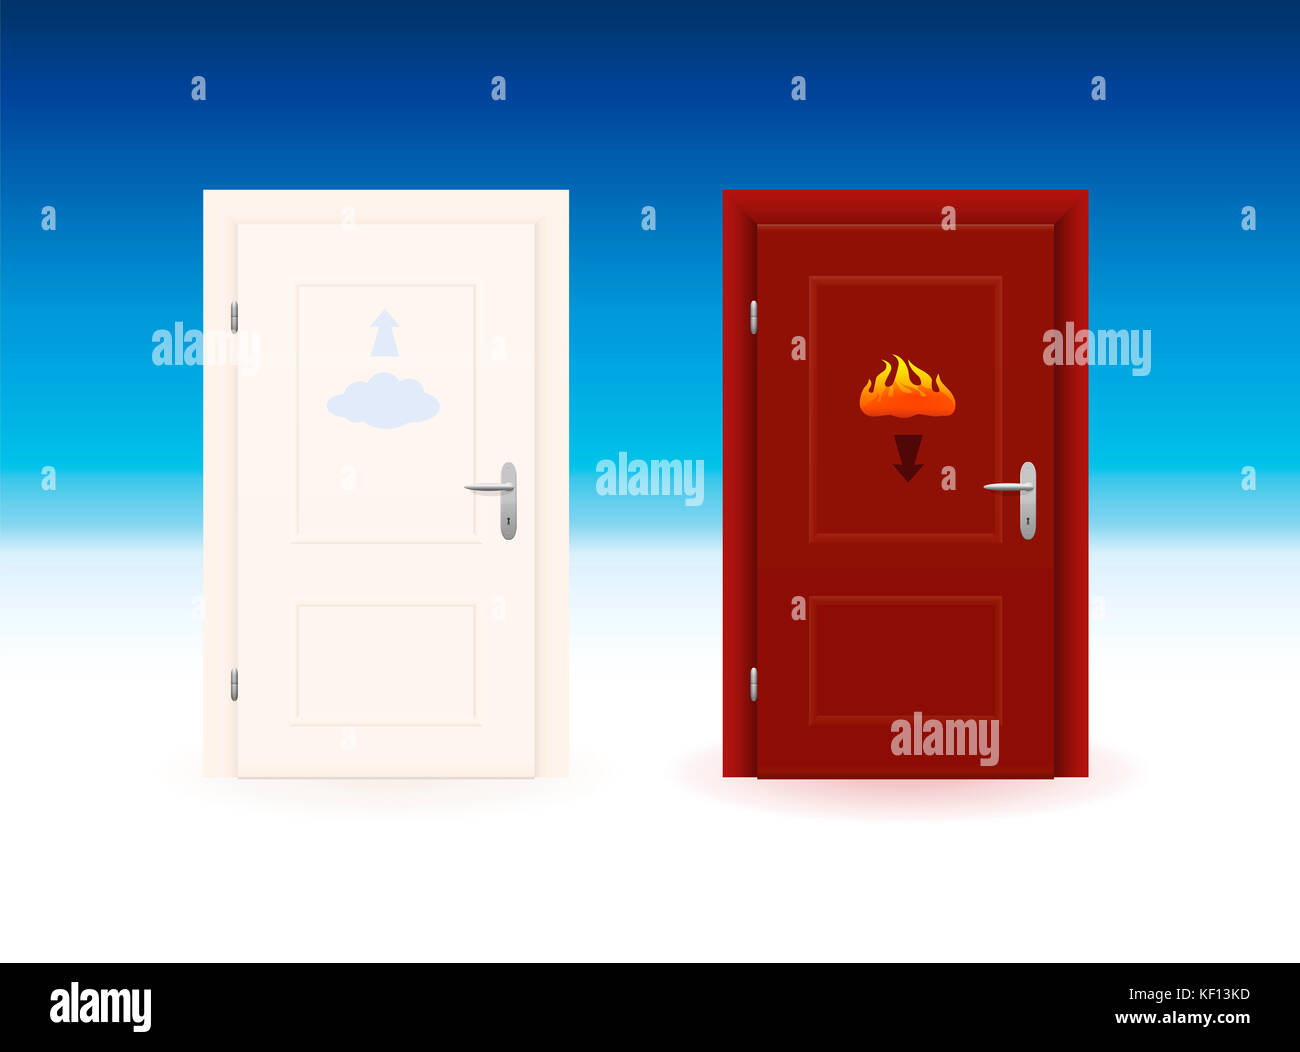 Heavens door to paradise with cloud icon and arrow pointing upwards for the good people and hell door for the bad, evil, wicked, sinful ones. Stock Photo